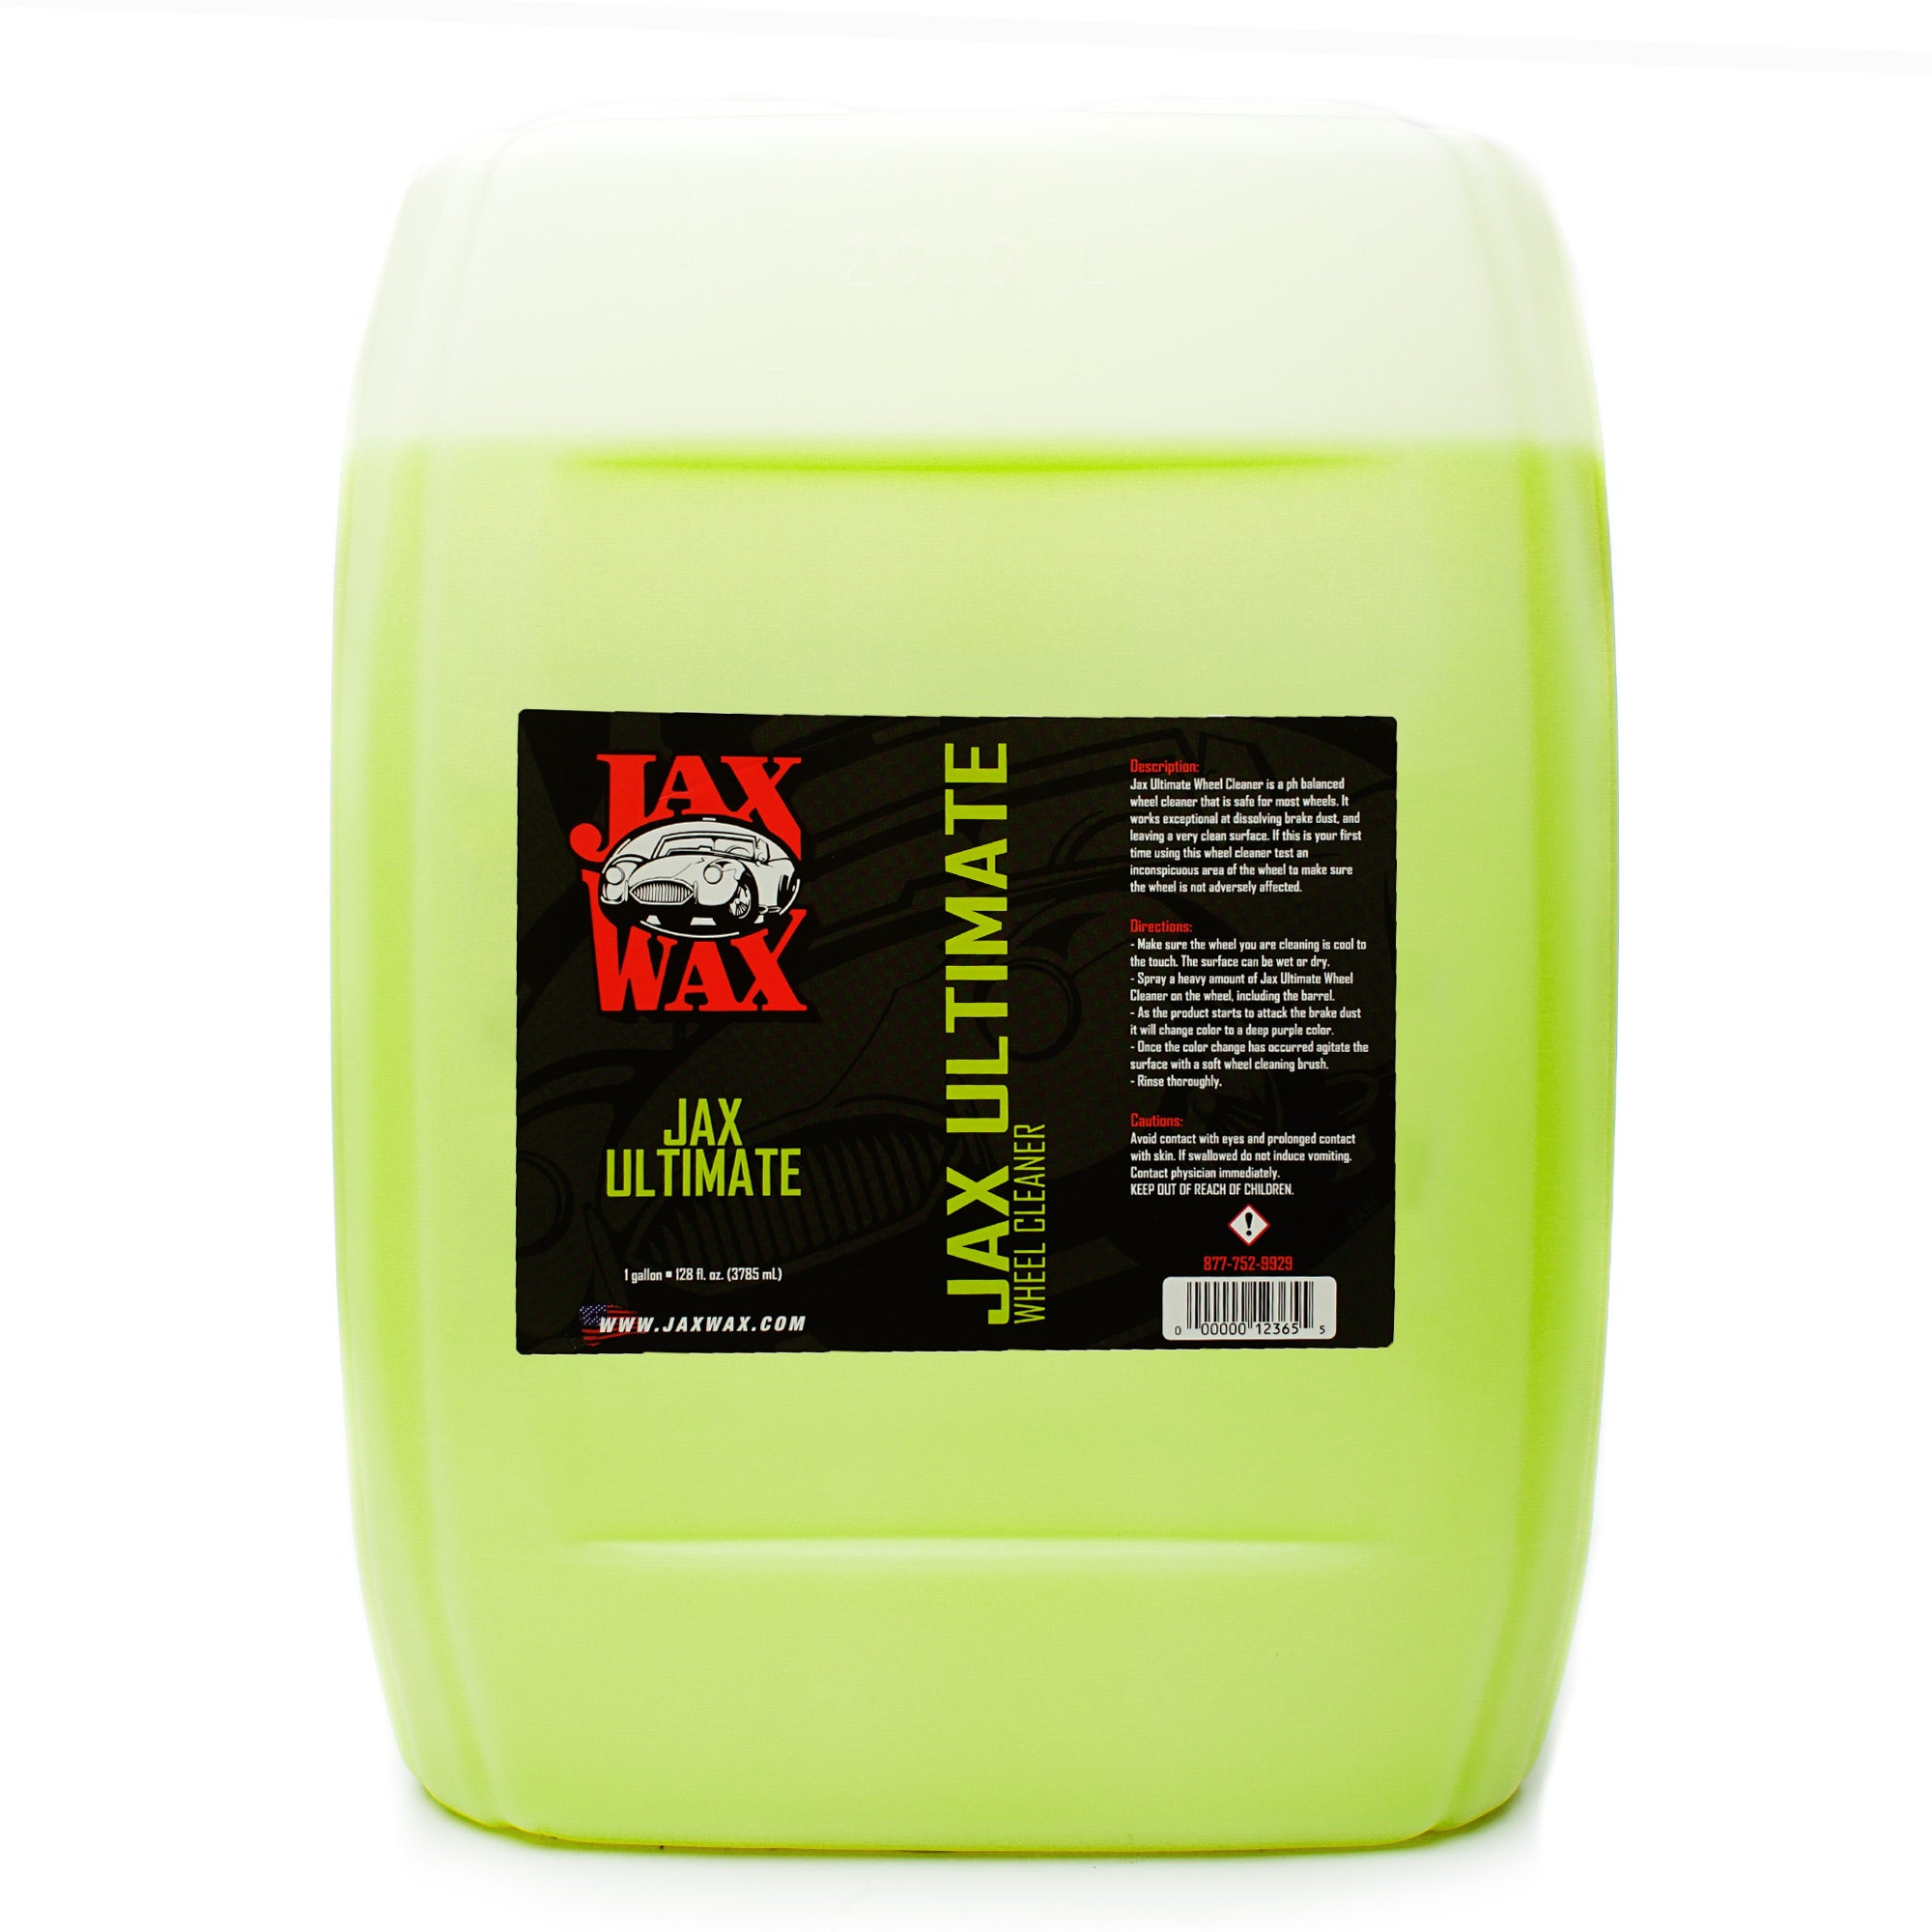 JAX WAX WHEEL AND TIRE CLEAN AND CARE KIT (32 OUNCE) – Jax Wax of